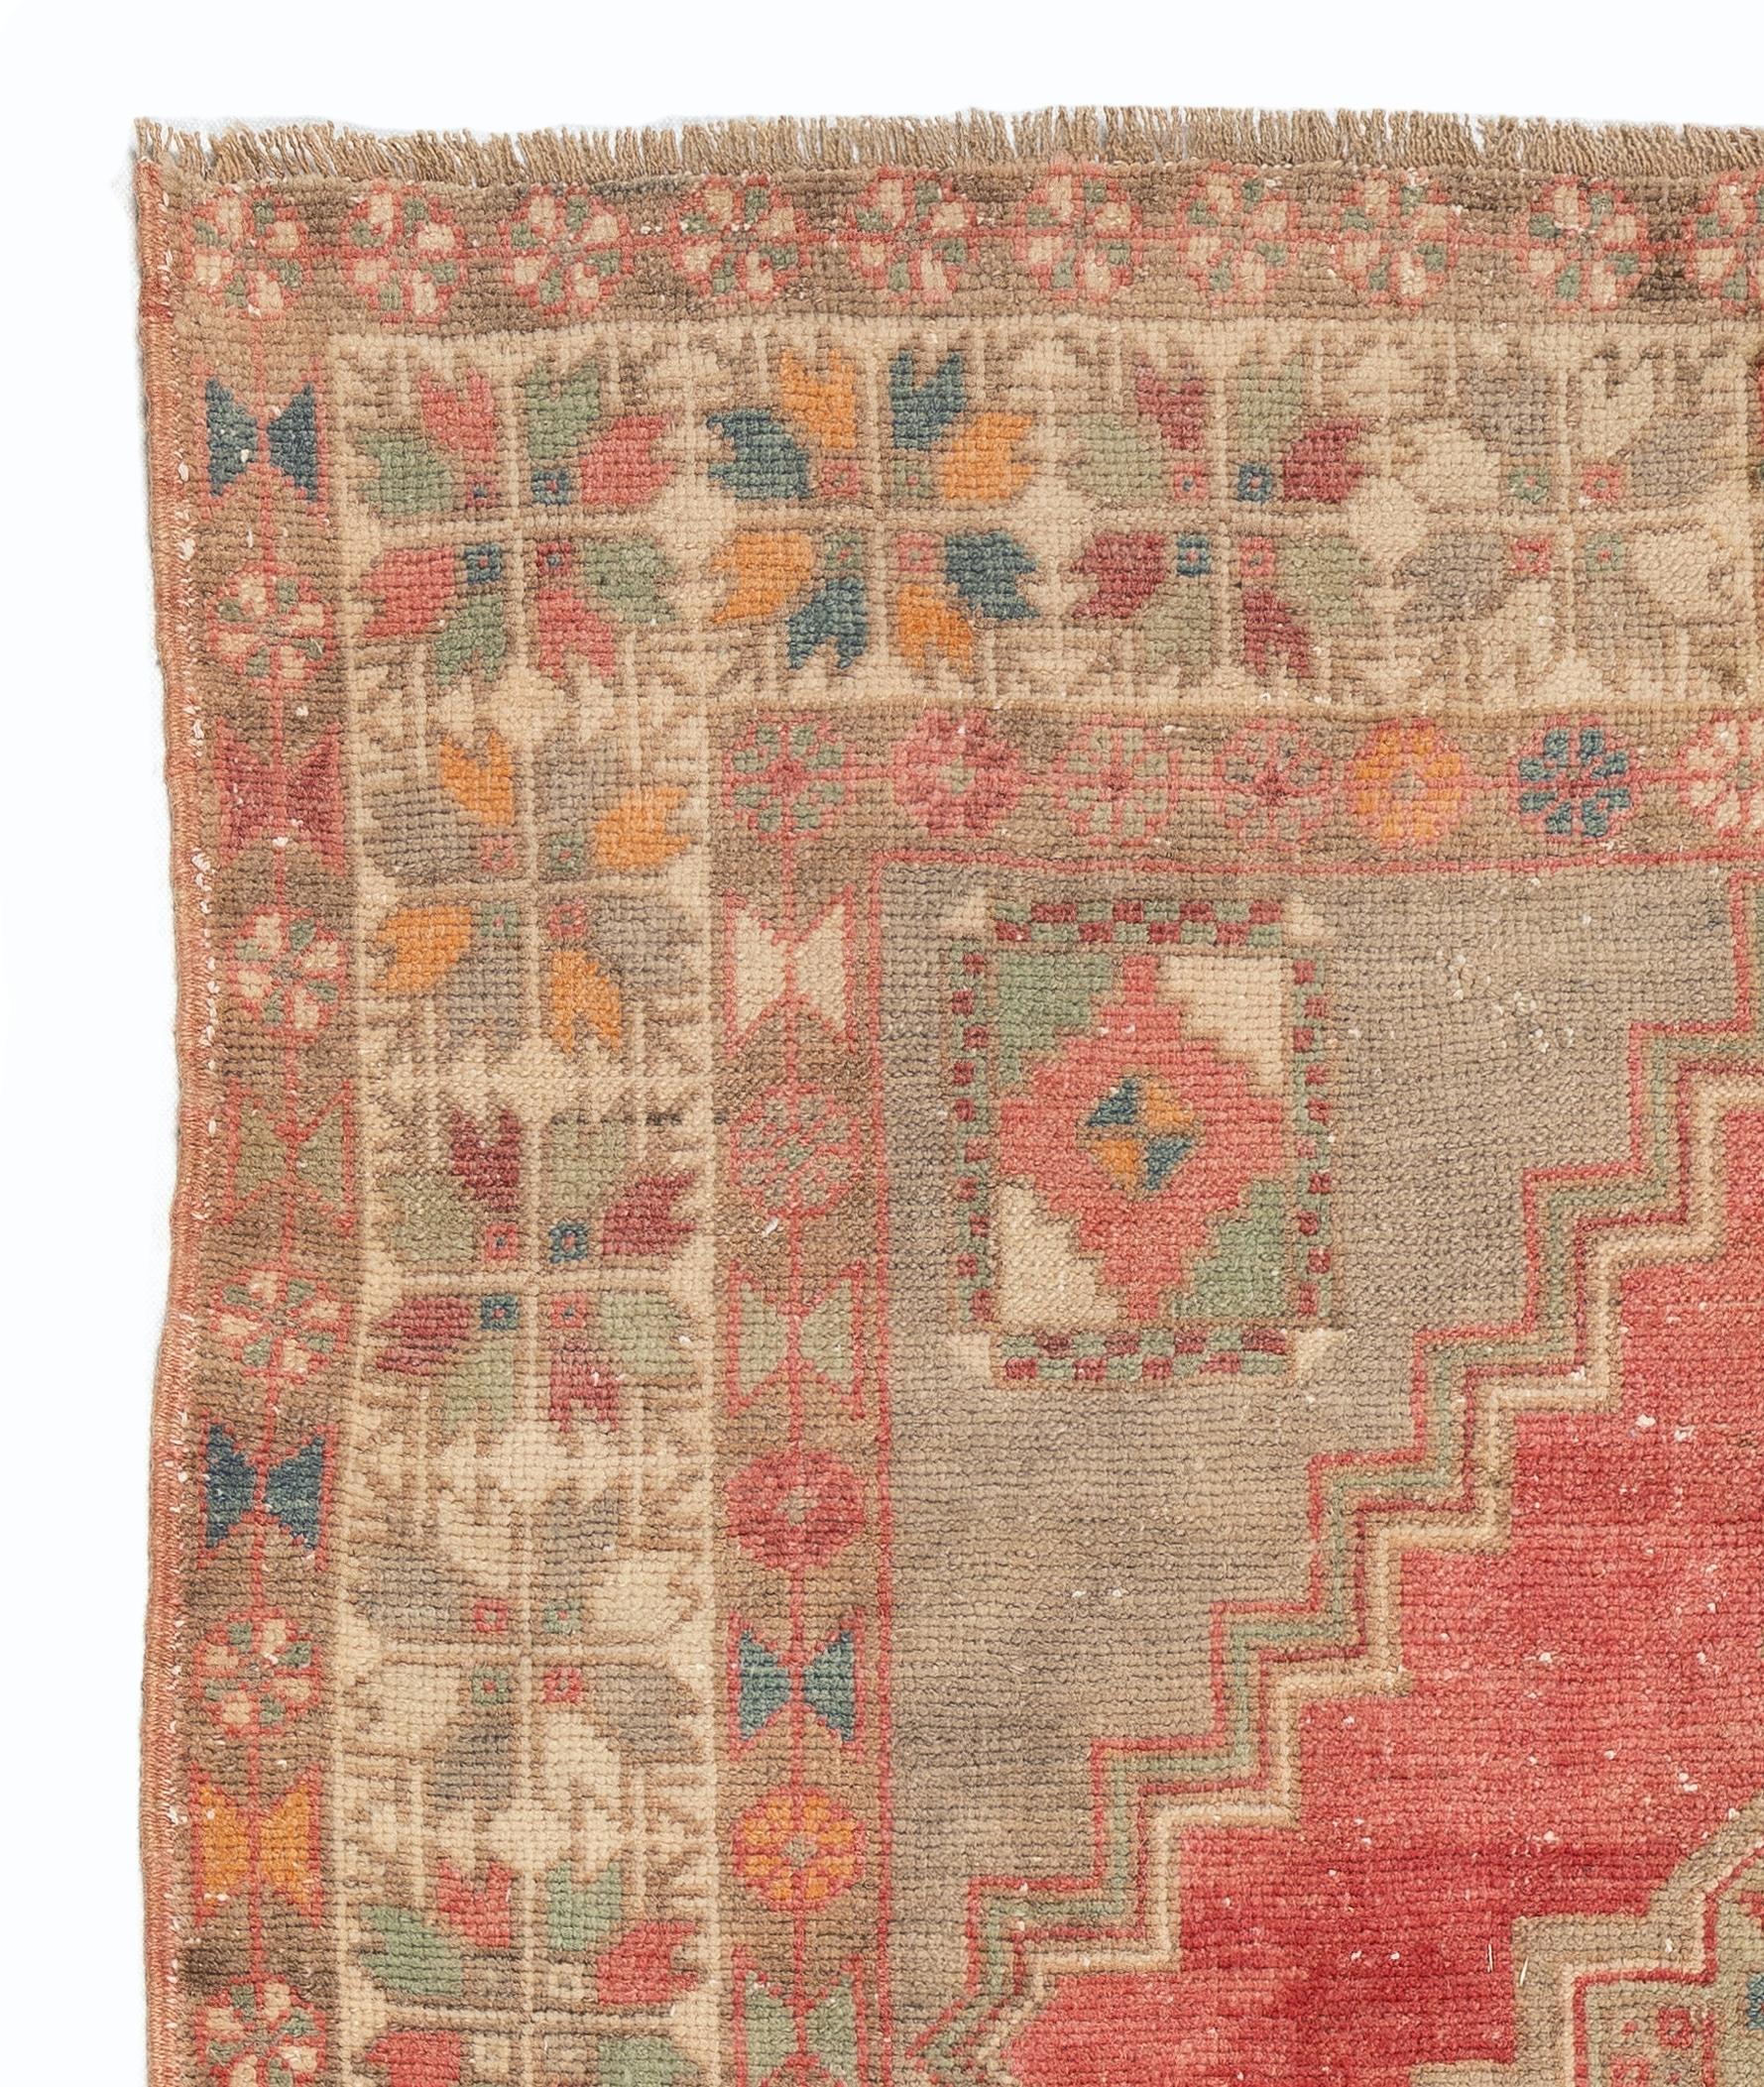 This gorgeous vintage hand-knotted Turkish area rug measures 3.5 x 6 ft. It is made of soft, lustrous sheep's wool on wool foundation, is in very good condition, sturdy and clean as a brand new rug. It features a well-drawn geometric design with two